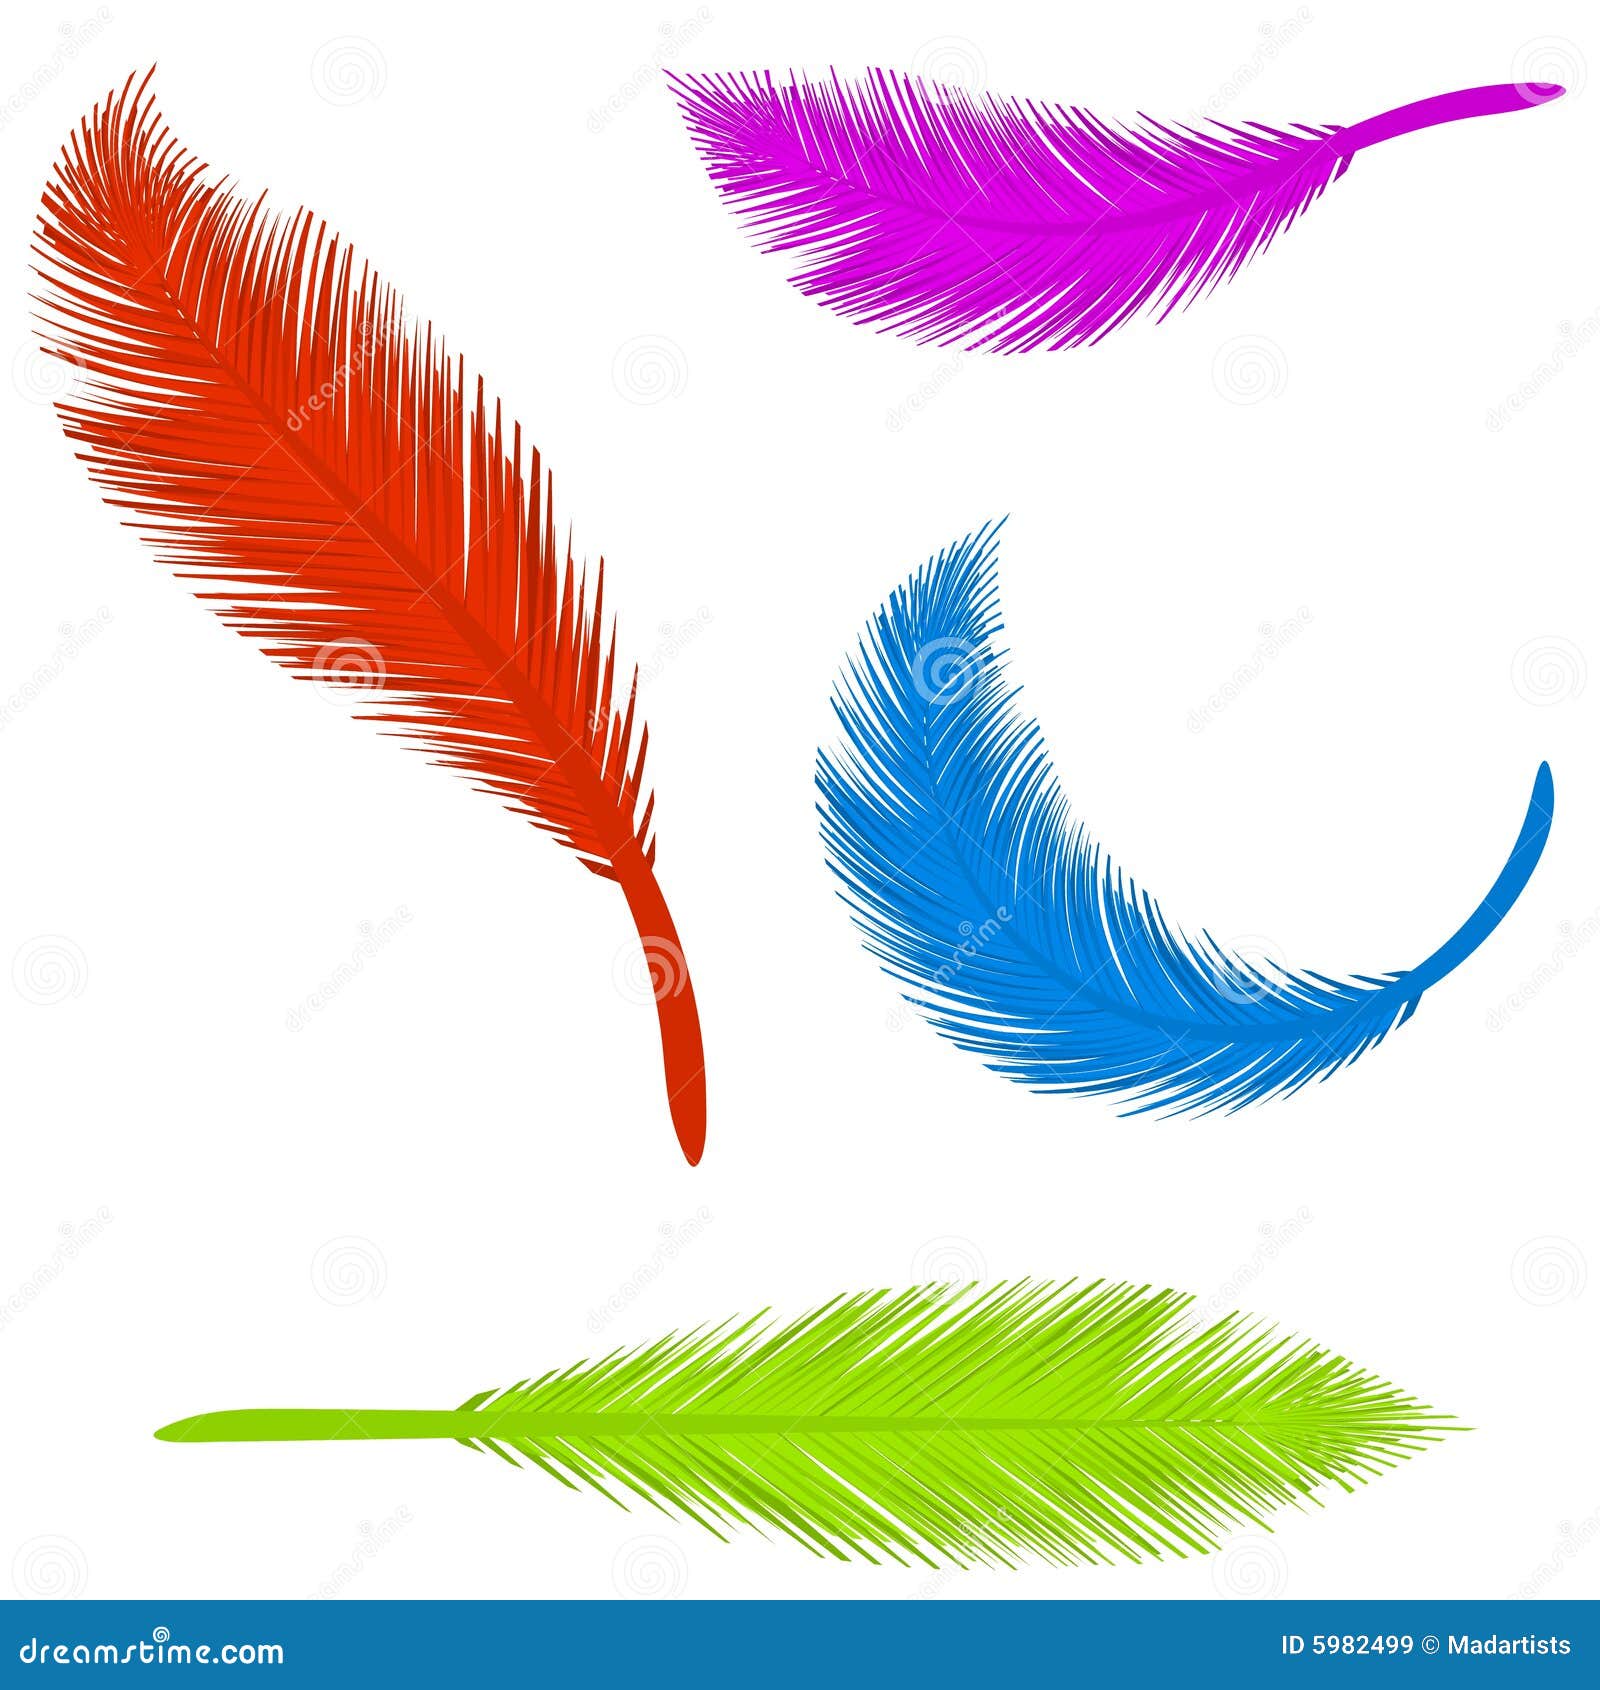 4 Colored Feathers Royalty Free Stock Images Image 5982499